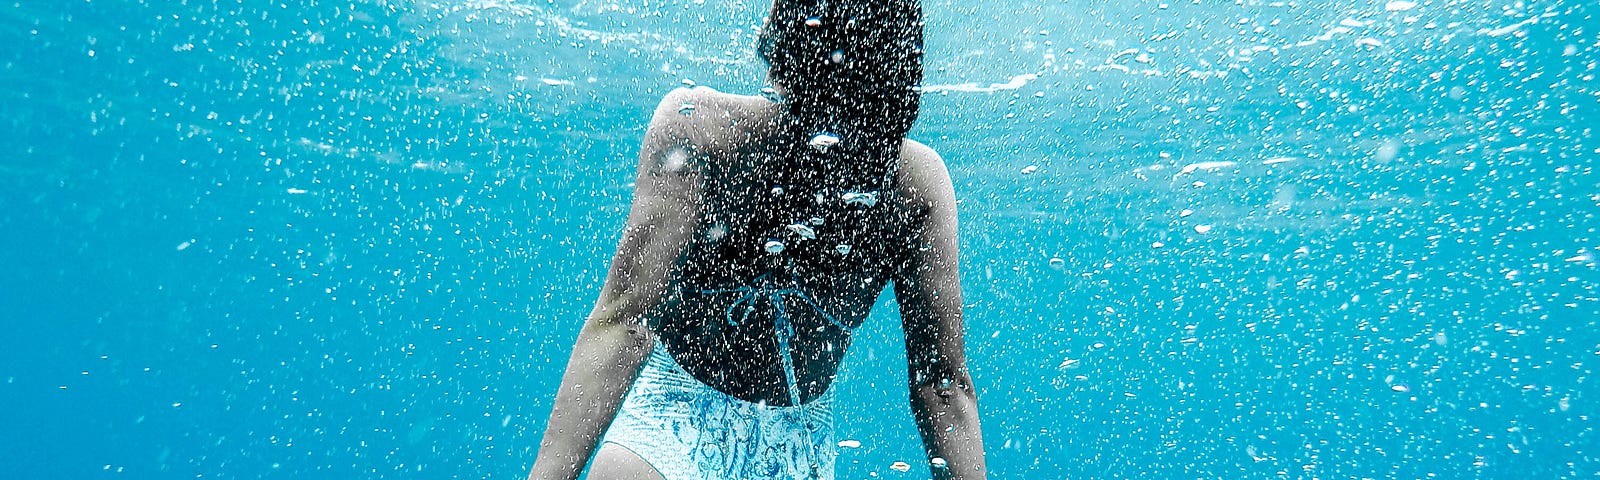 A Woman in a white bathing suit, as seen from behind. She swims towards the surface of the open water, her arms pointed down at at a 30 degree angle from her body. The water is light blue and their are bubbles within it.